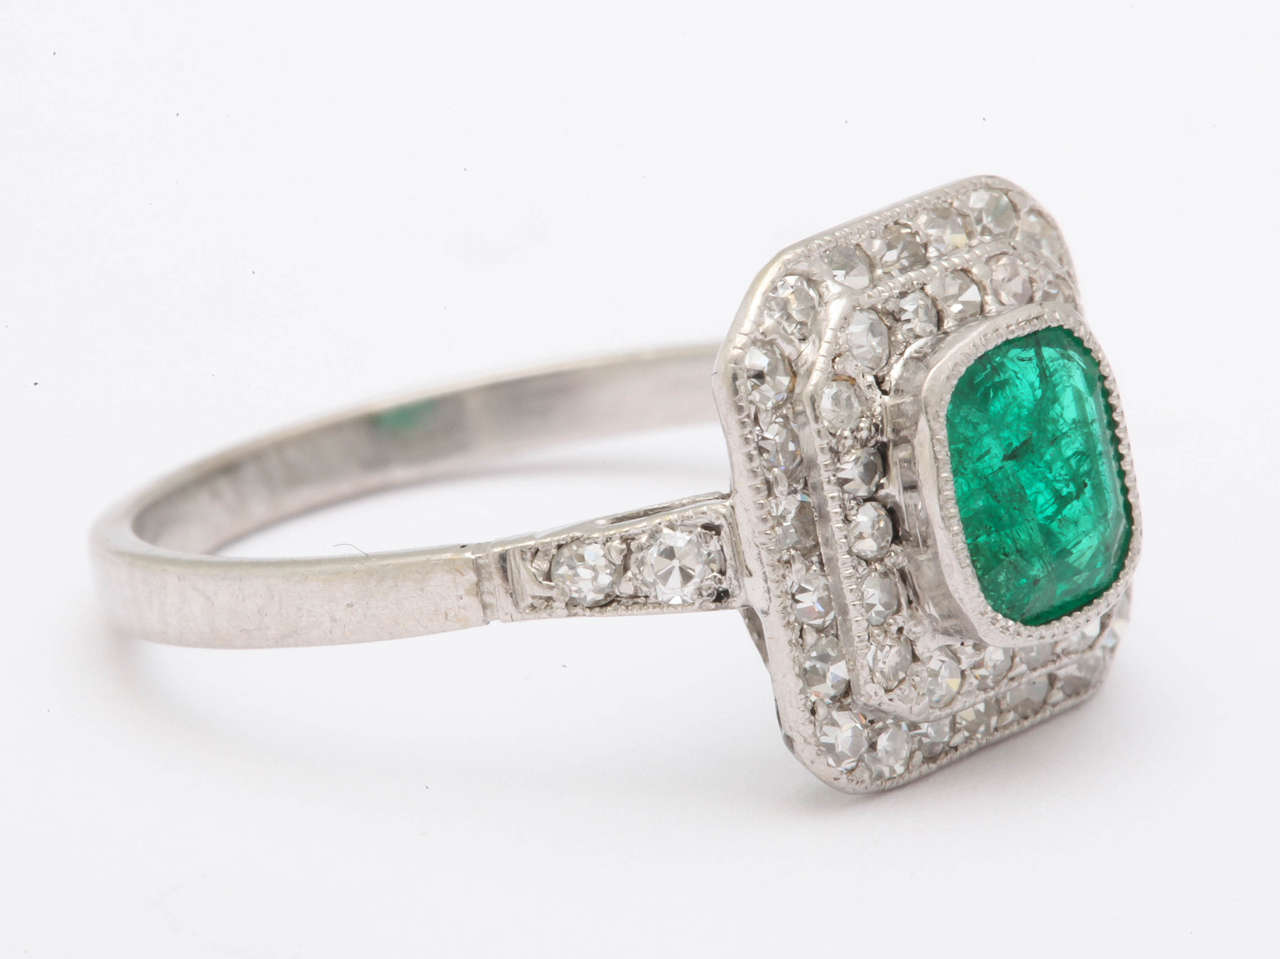 A lovely early 19 the century ring, constructed in platinum with 2 stepped tiers of pave set diamonds. The center stone is a classic bright green color and is approximately 5 by 6 mm  cushion cut natural emerald.